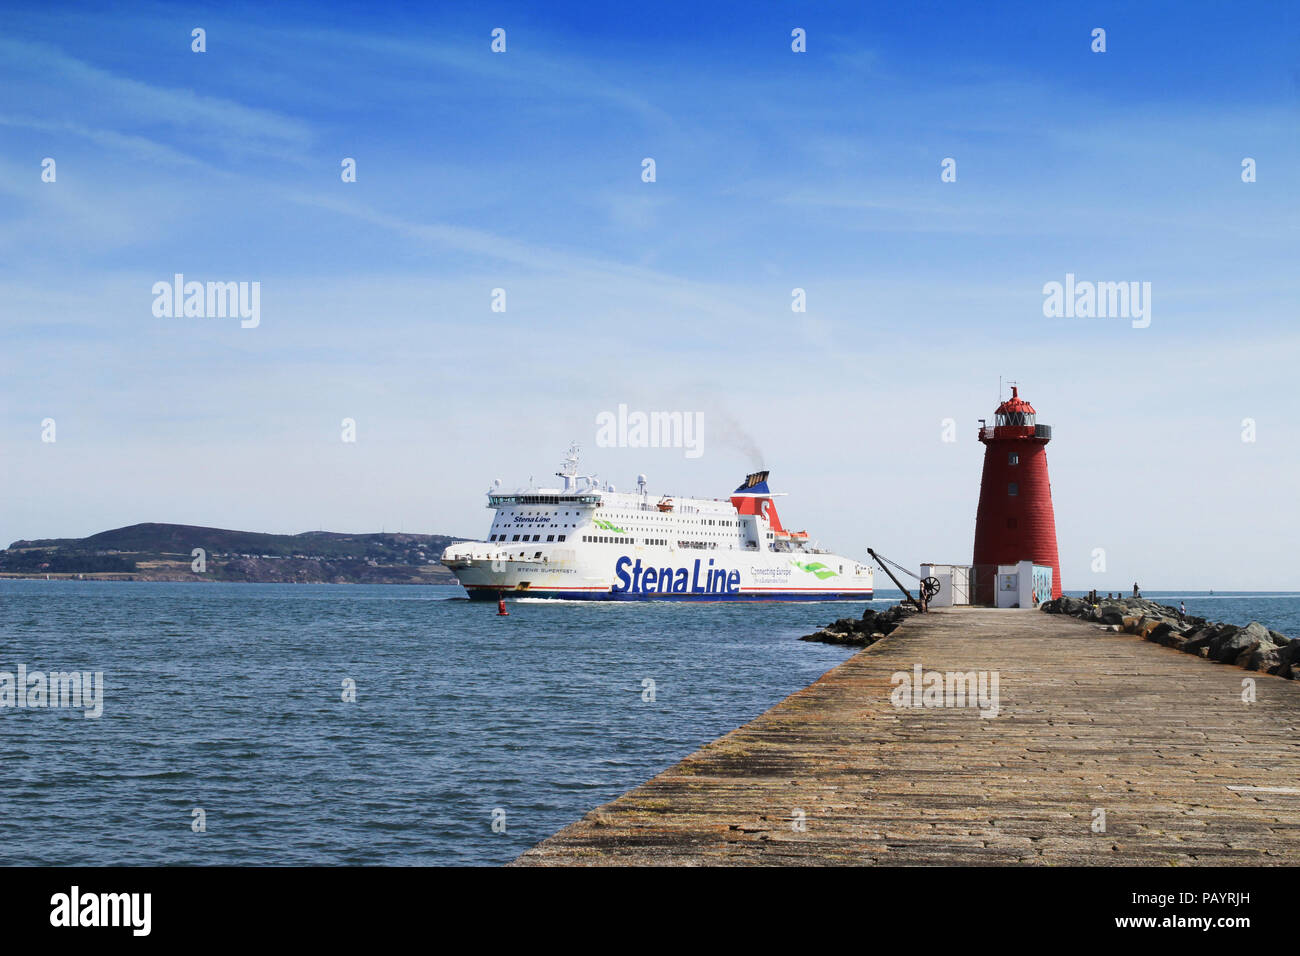 The Stena Superfast X car ferry passing Poolbeg Lighthouse,Dublin, Ireland on its way to Dublin Port with Howth Head in the background. Stock Photo